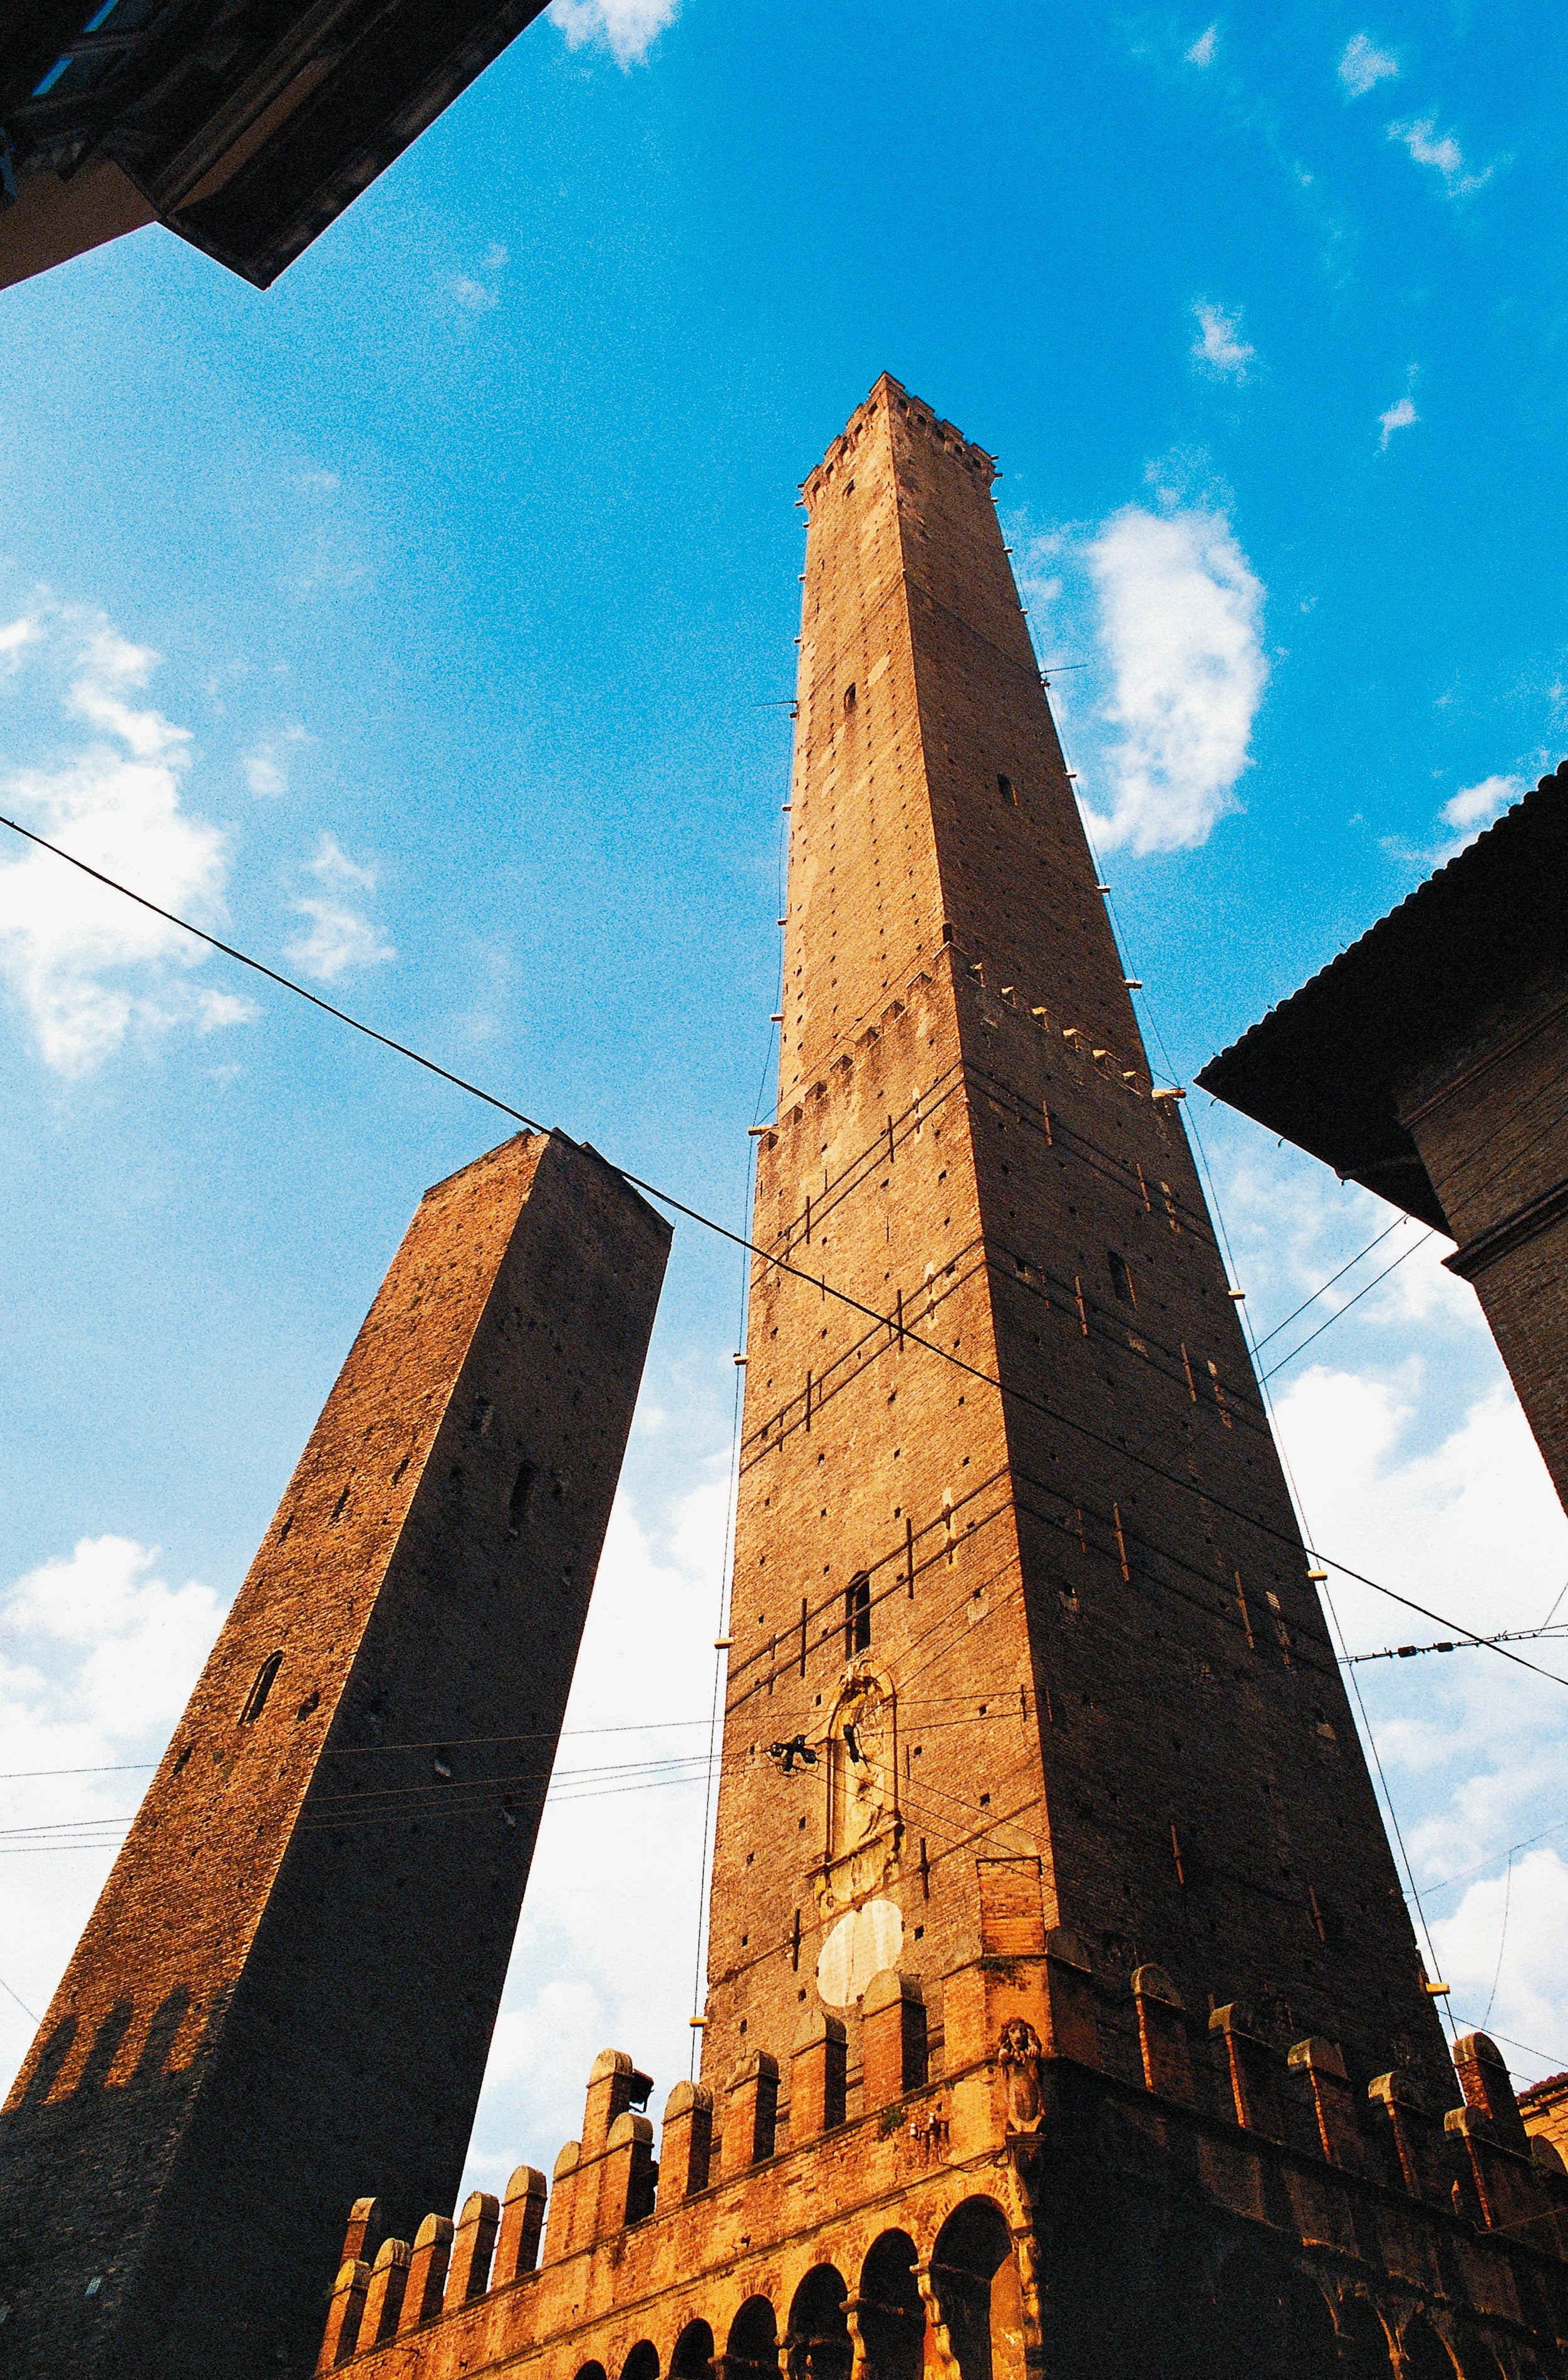 The towers of Garisenda (left) and Asinelli in Bologna